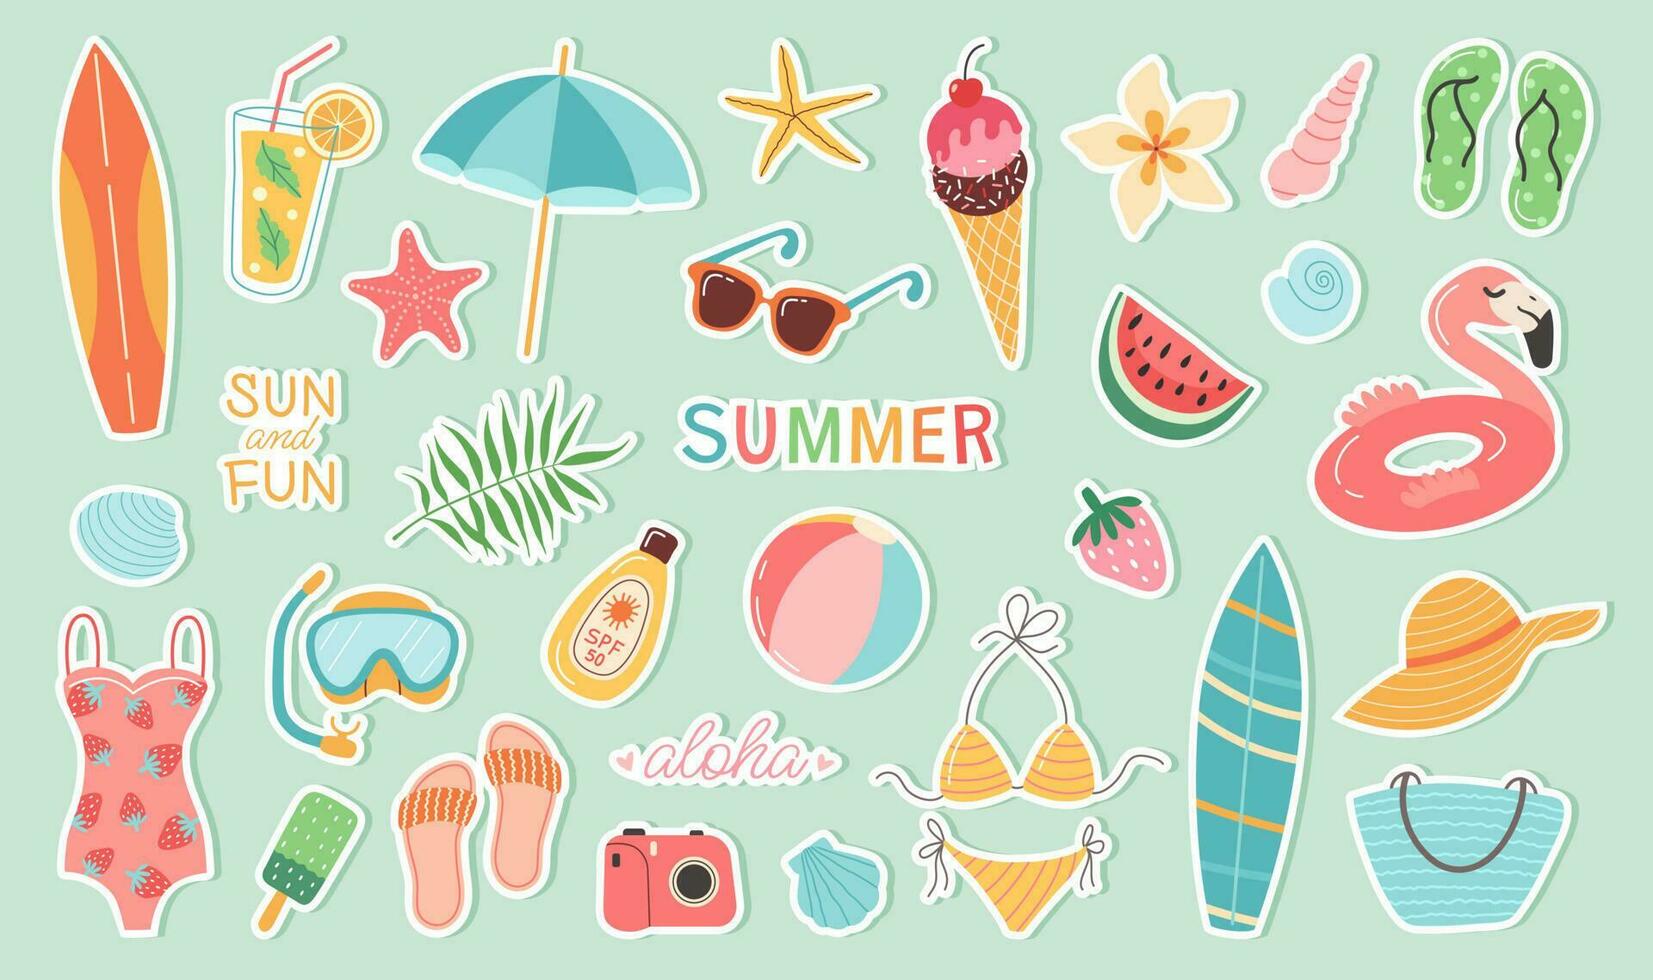 Set of summer stickers. Icons for tropical vacation. Seasonal elements collection. Flamingos, ice cream, pineapple, tropic leaves, cocktails, plumeria, watermelon, beach accessories. vector